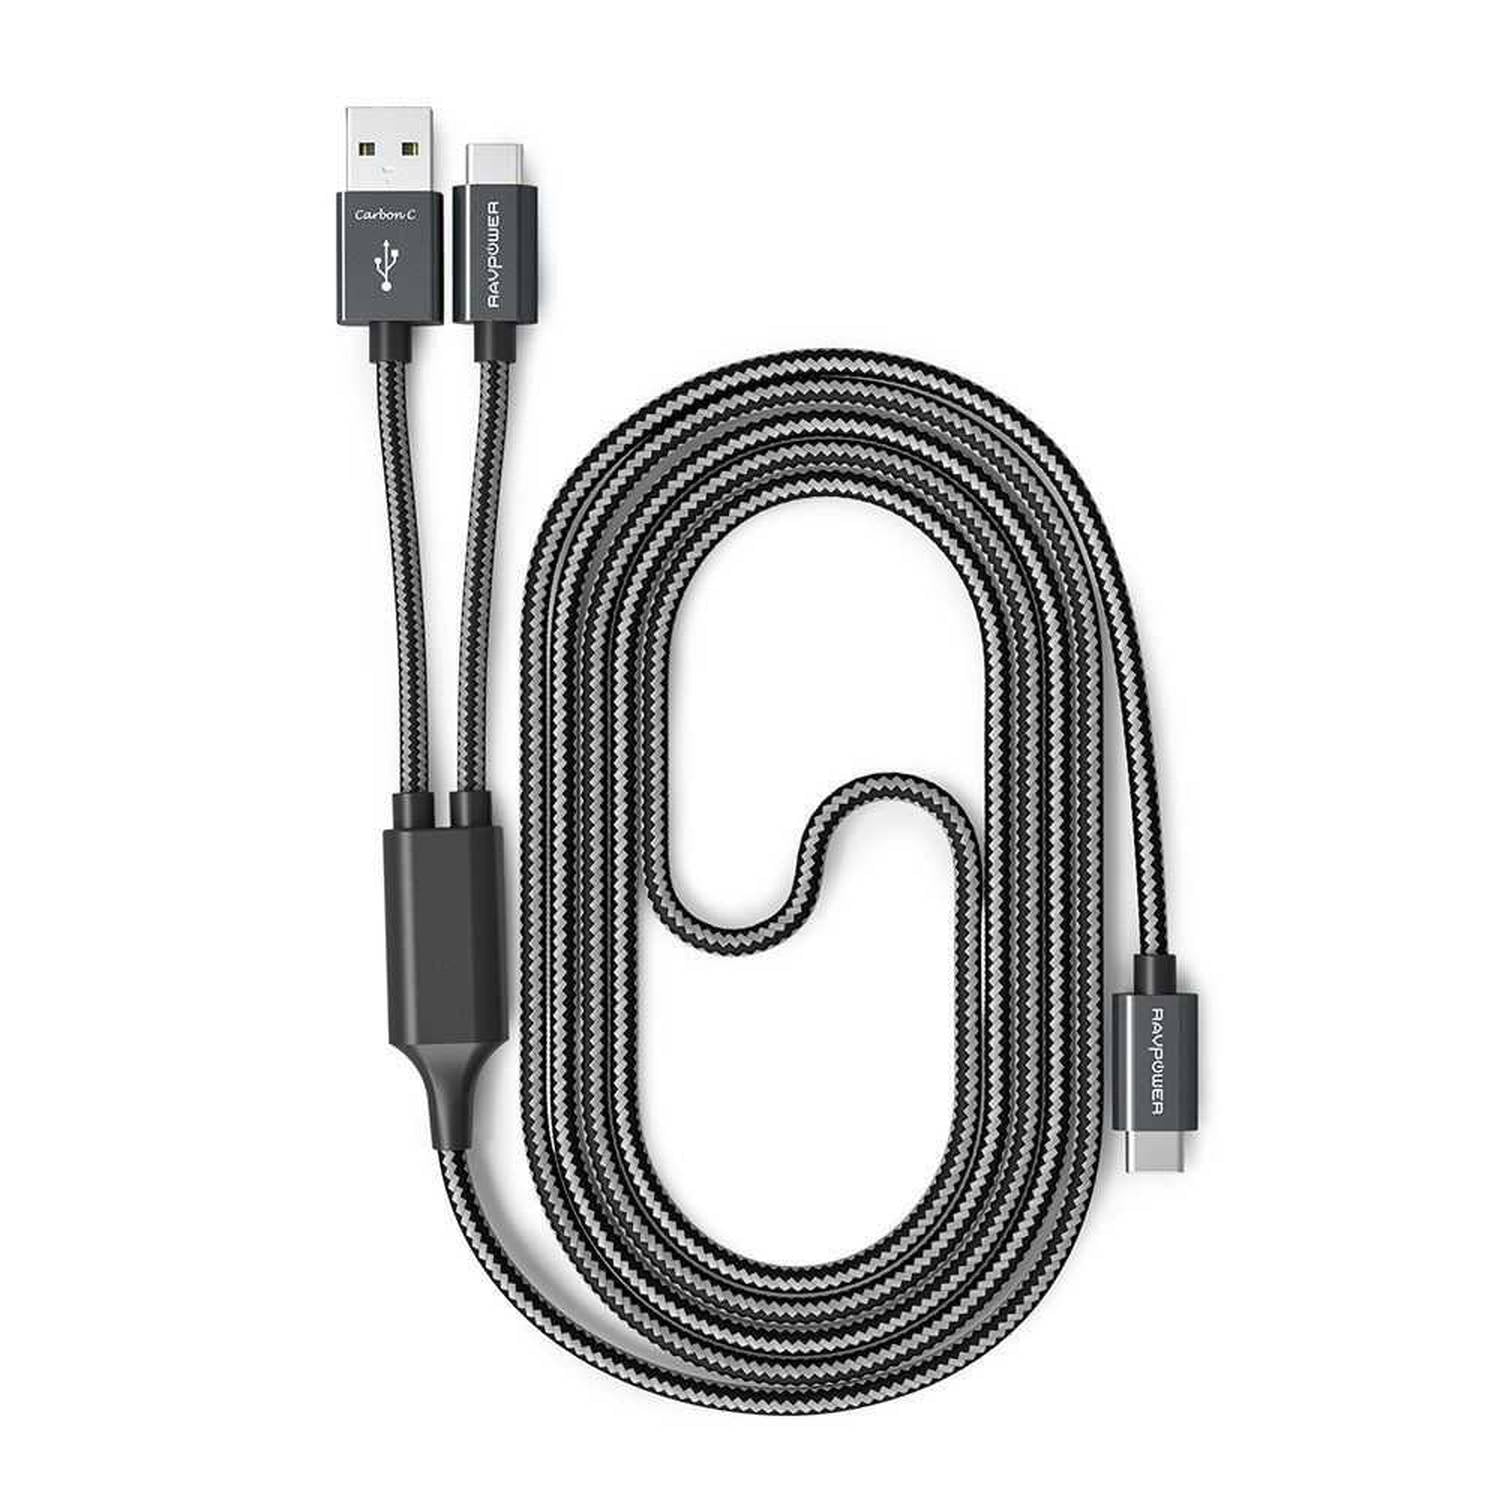 RAVPower 2 in 1 Nylon Braided Type-C Cable 3.3ft Compatible for Android Type-C Devices